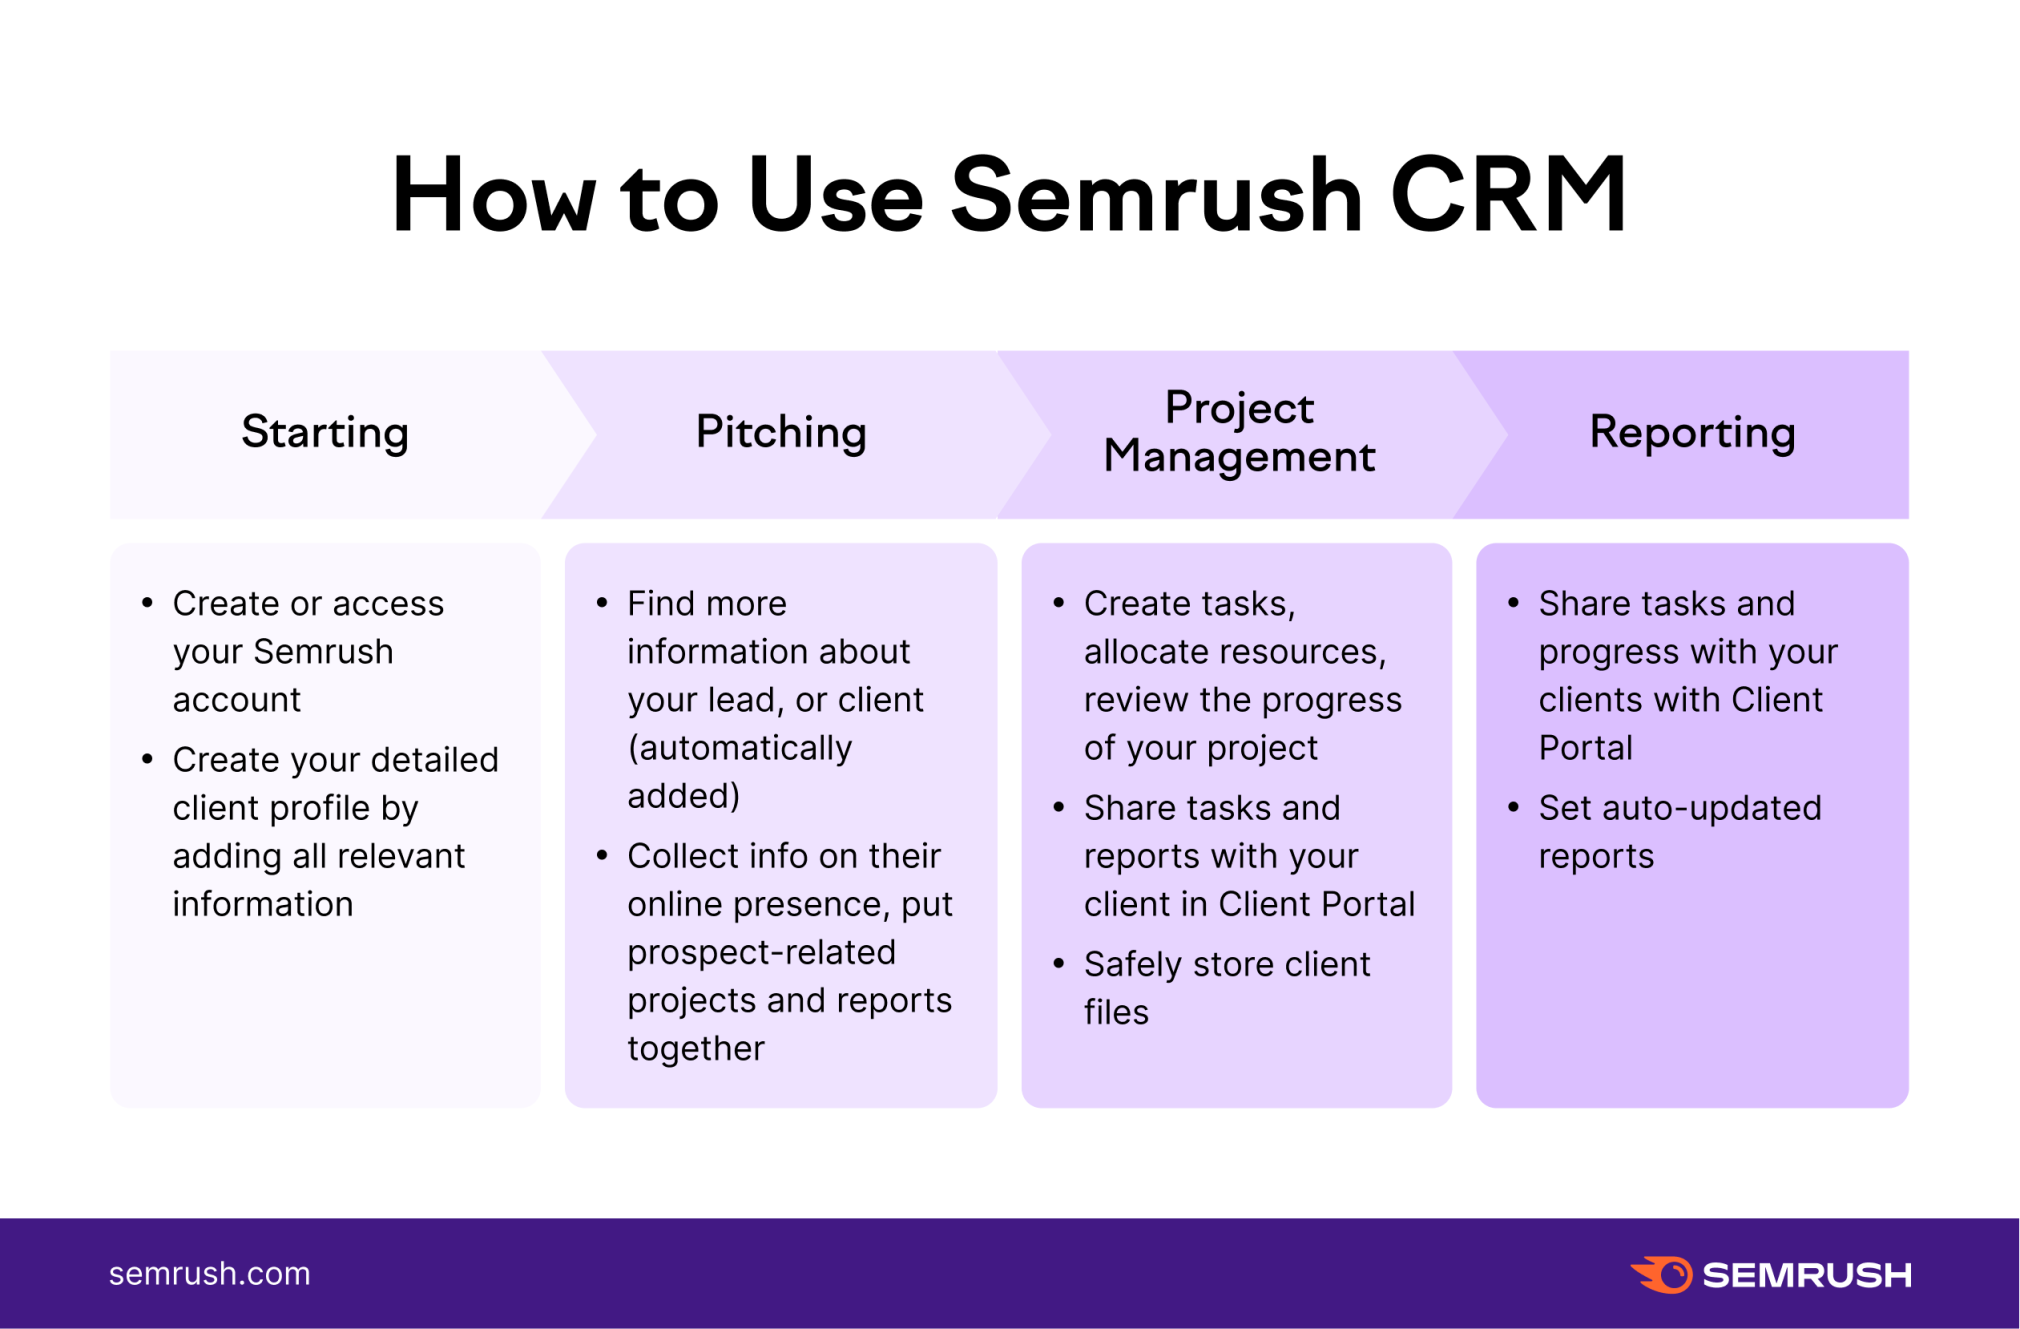 How to use CRM for marketing